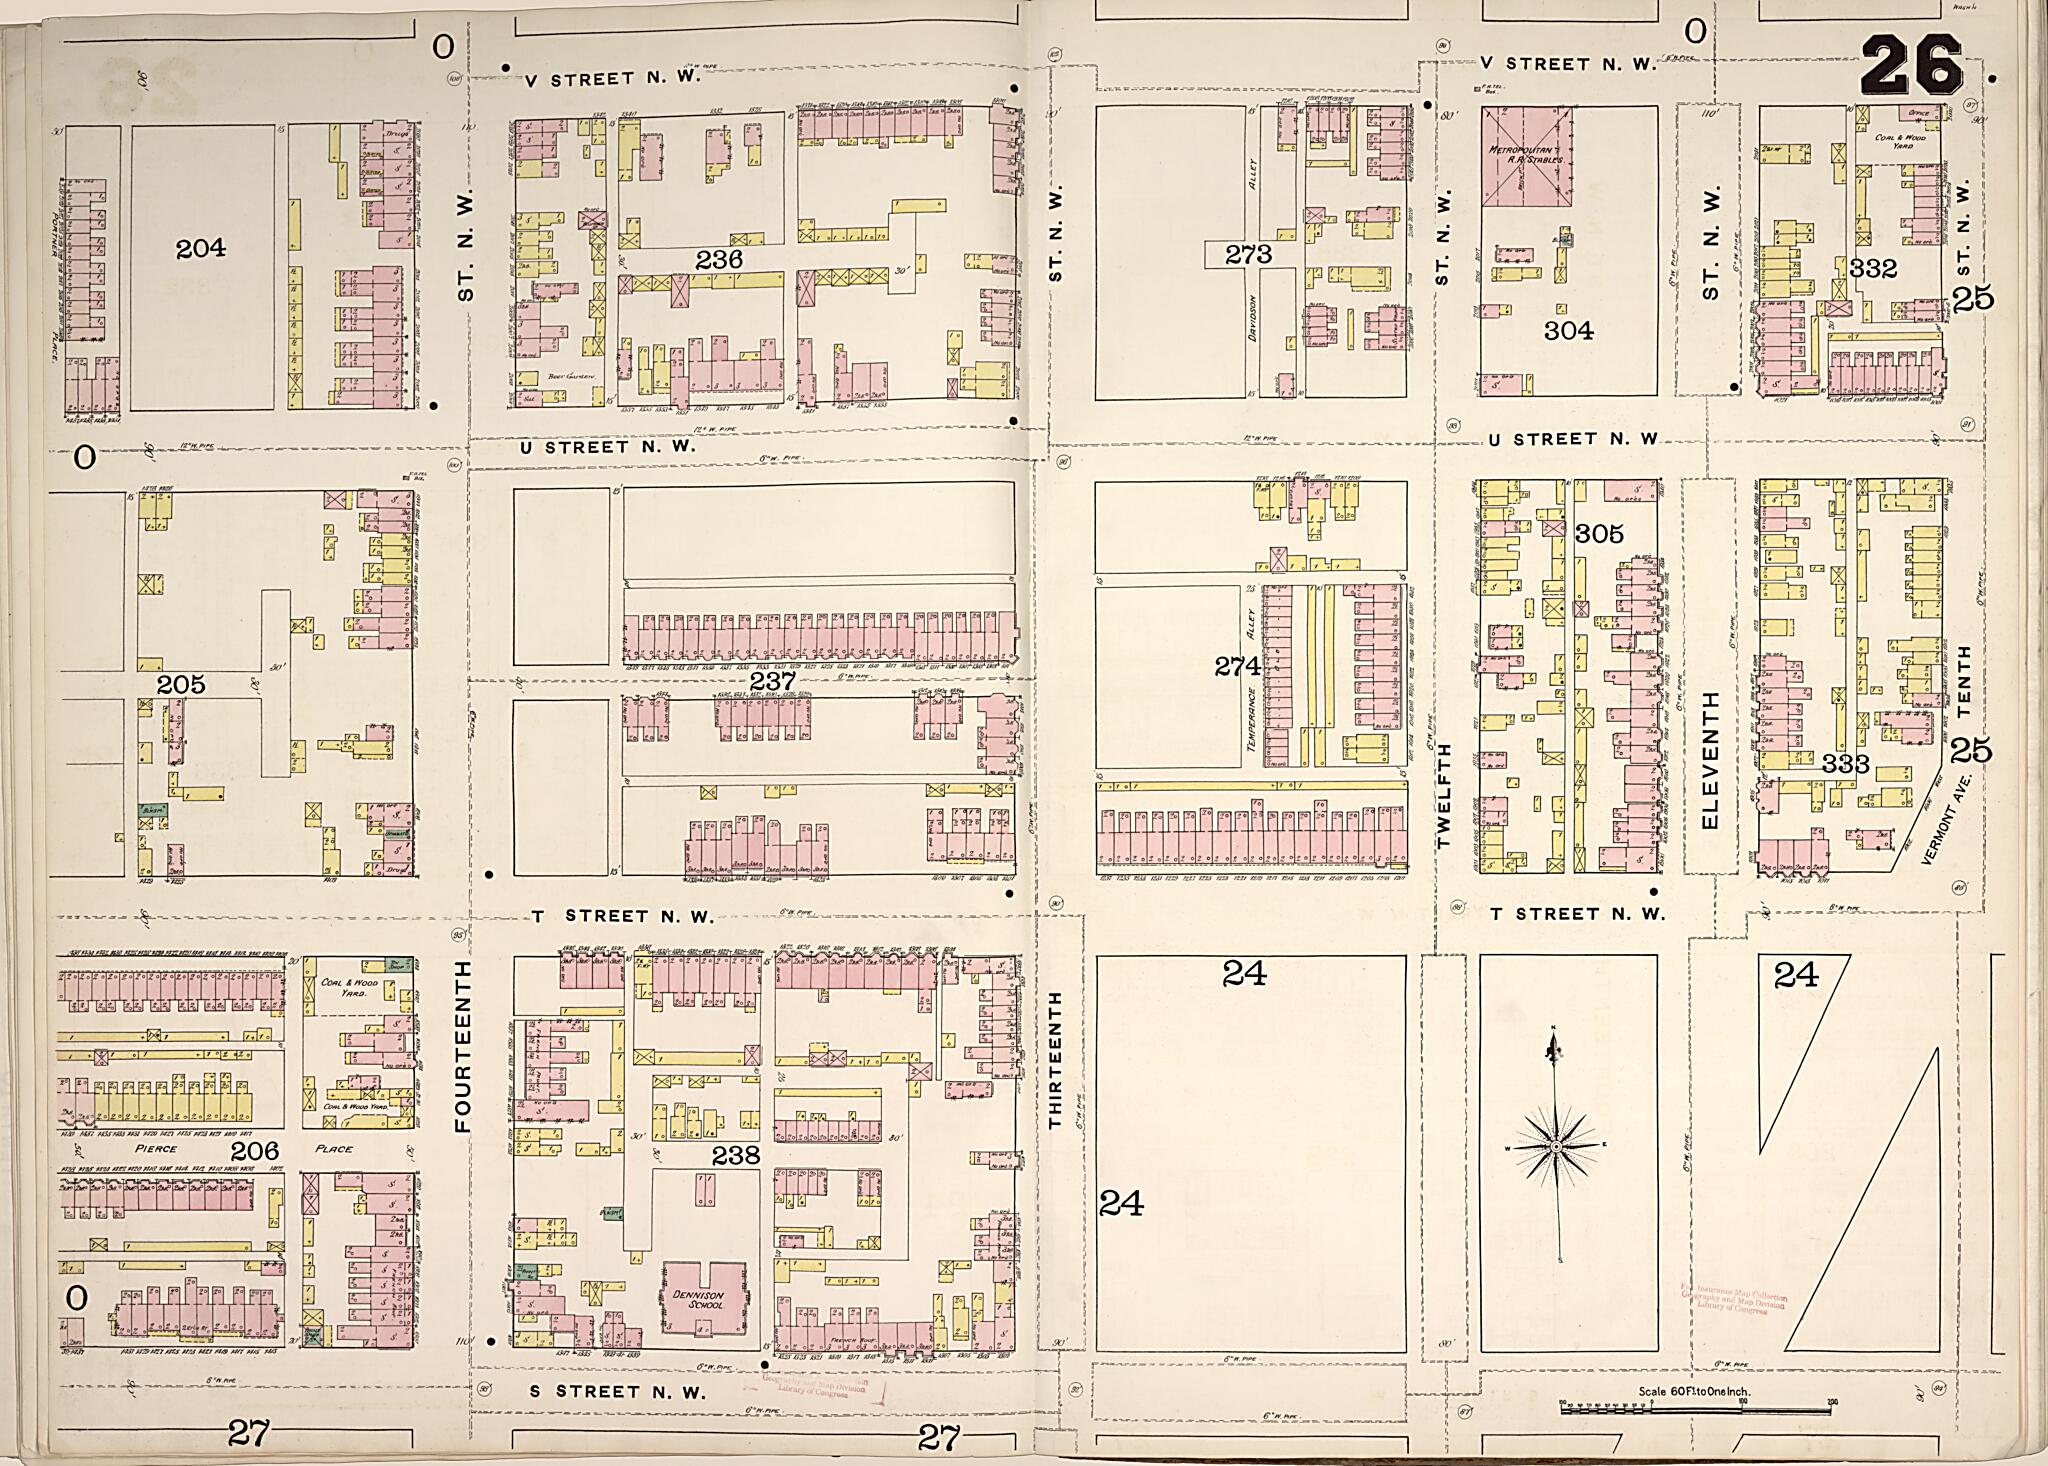 This old map of Washington D.C. was created by Sanborn Map Company in 1888